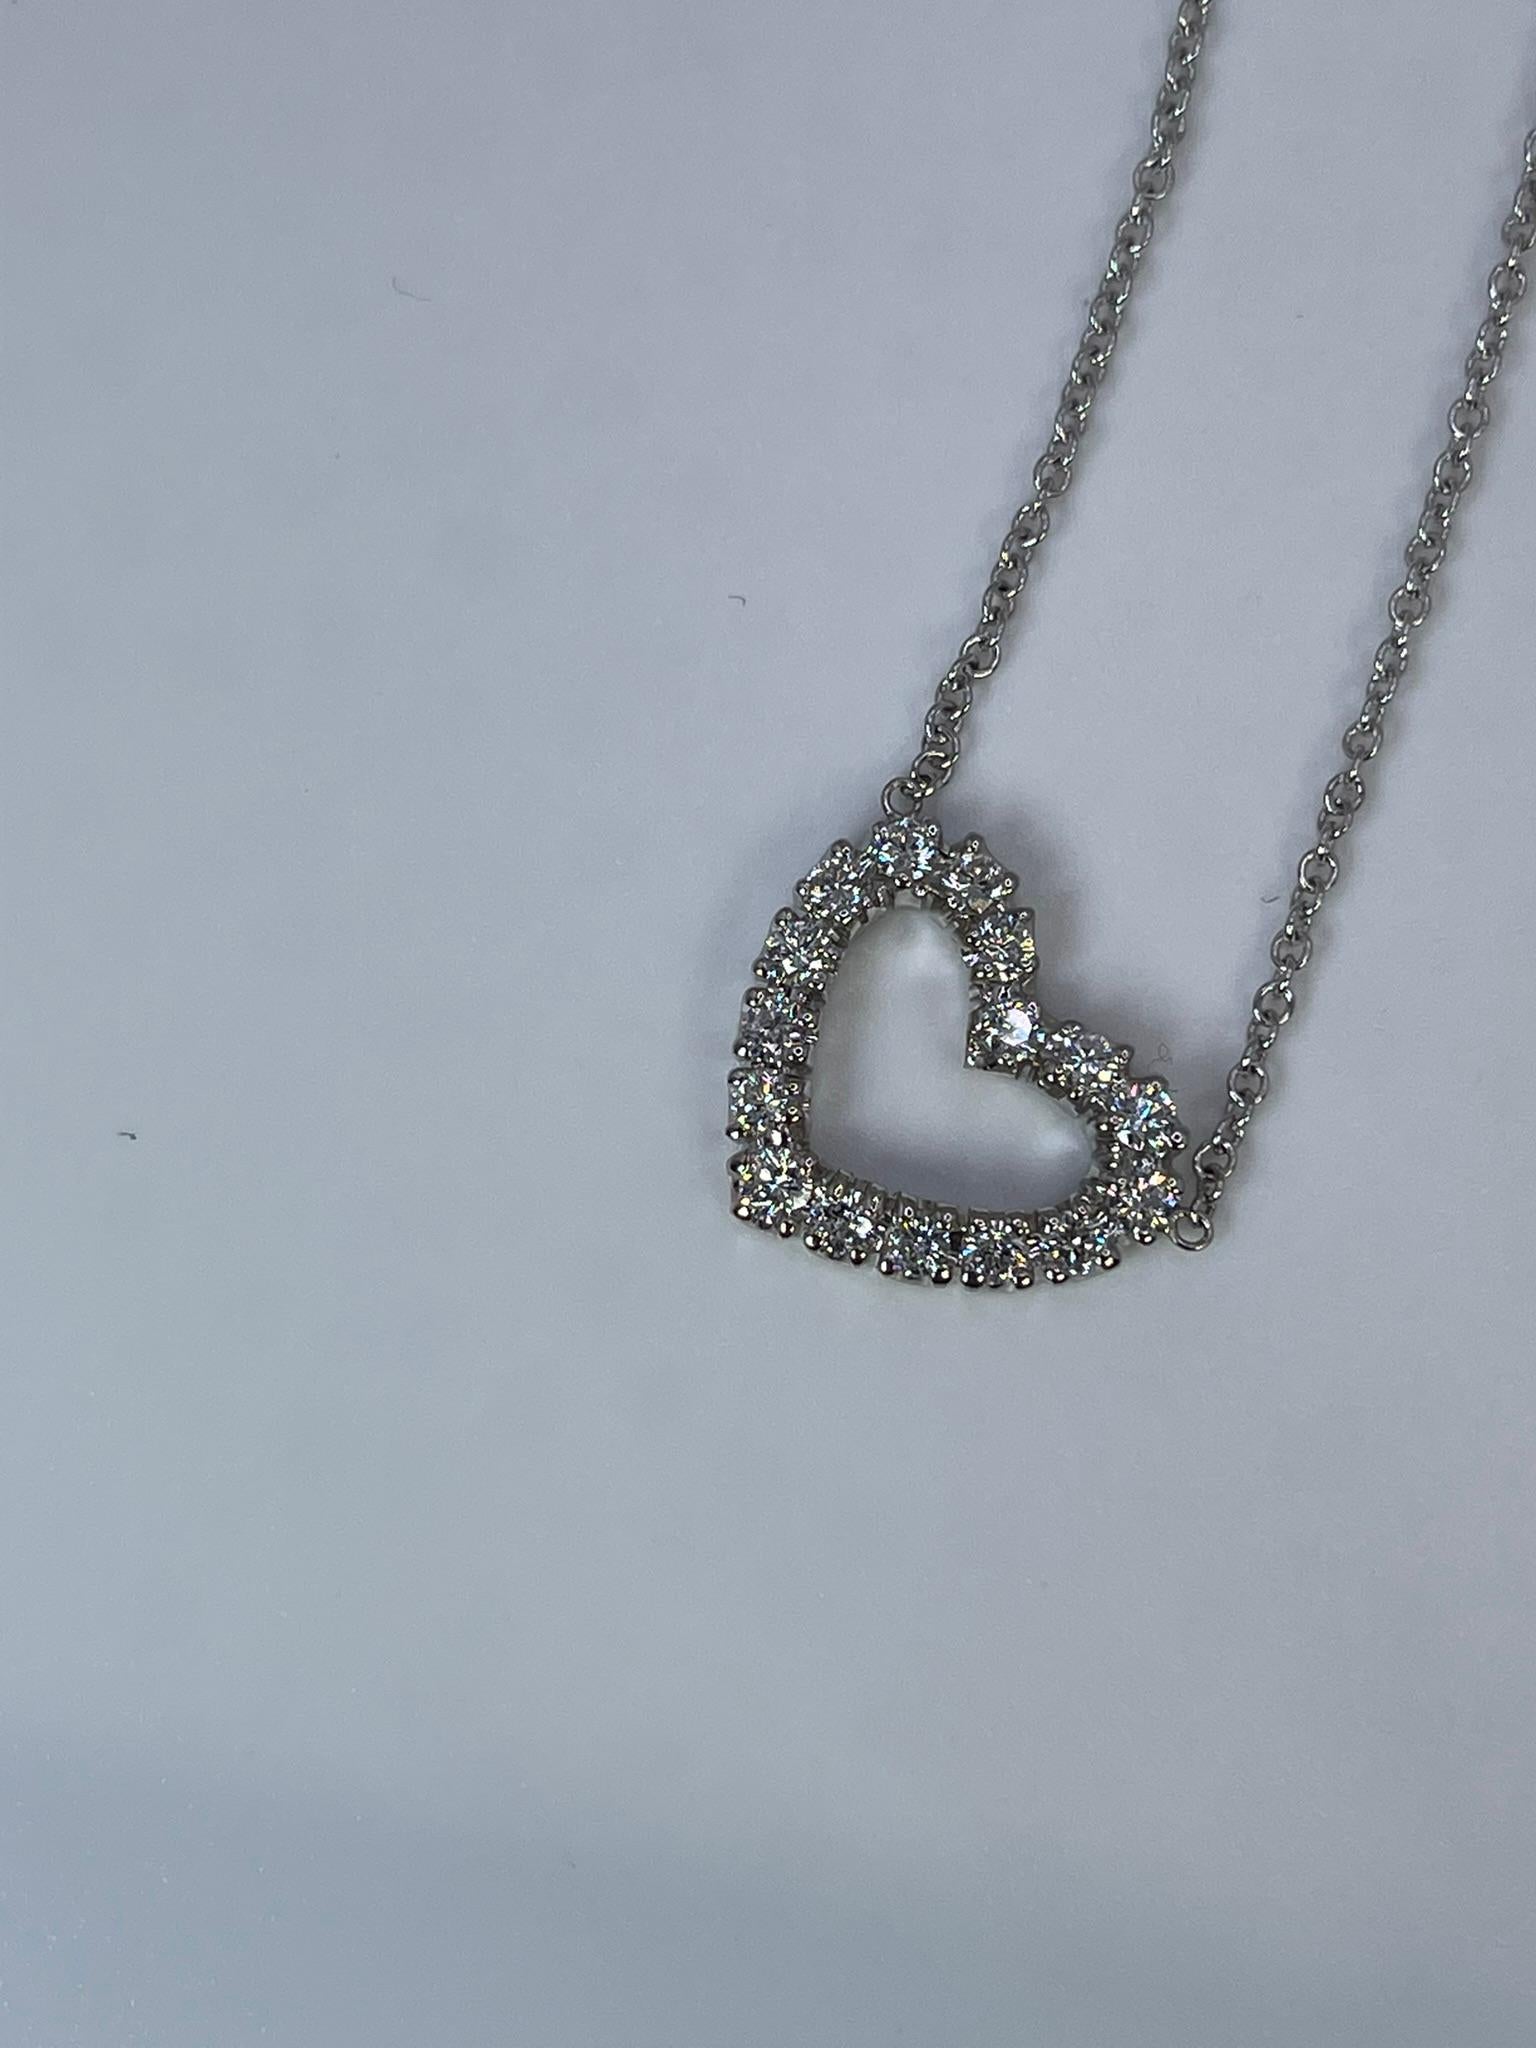 Large heart pendant necklace made with natural diamonds in 14KT gold.

GRAM WEIGHT: 5.17gr
GOLD: 14KT white gold
NECKLACE-18